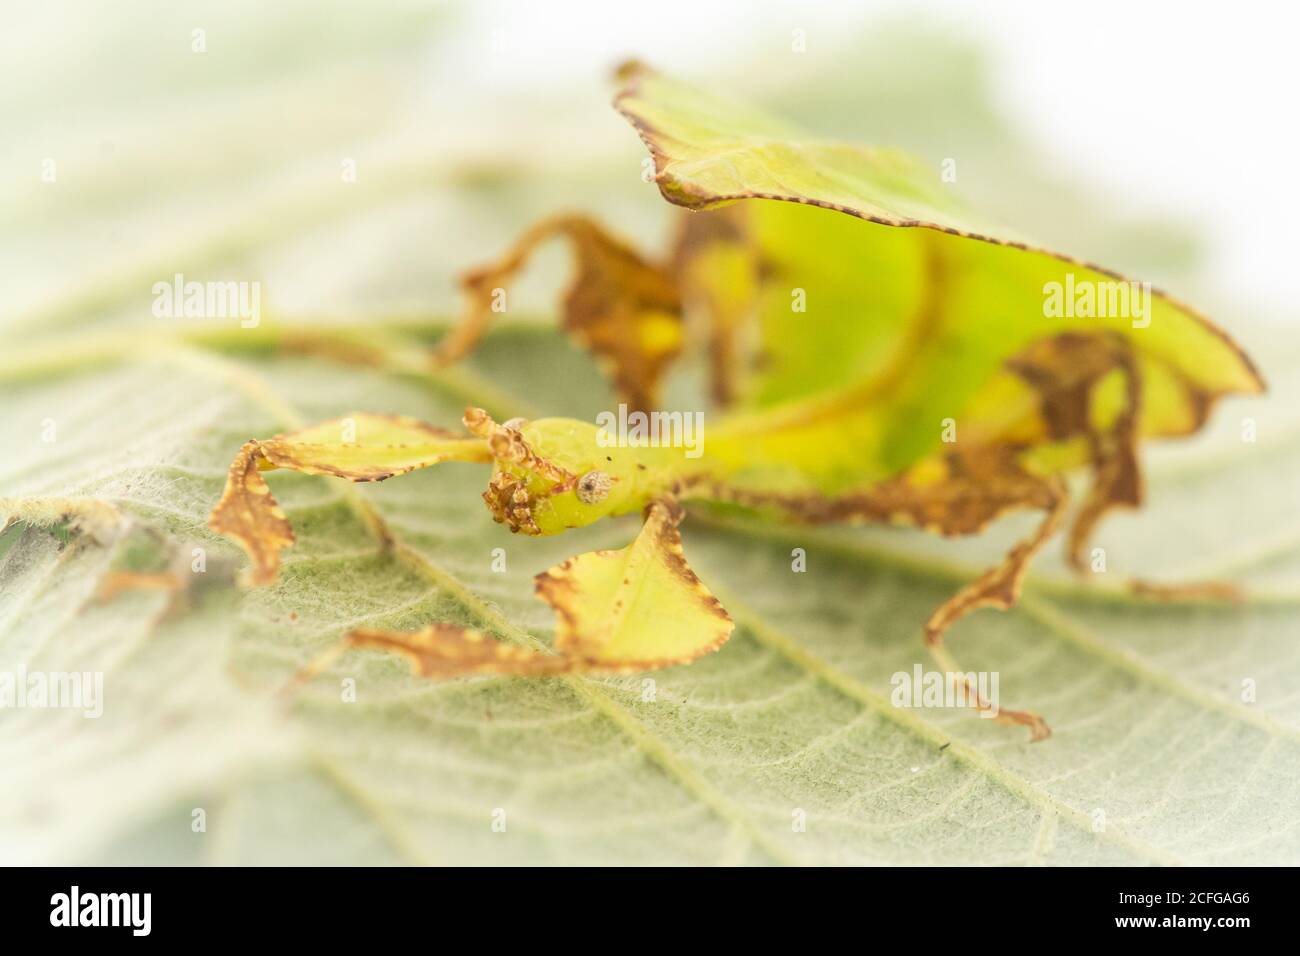 The young giant leaf insect (Phyllium giganteum) hides against the bramble leaf it eats Stock Photo